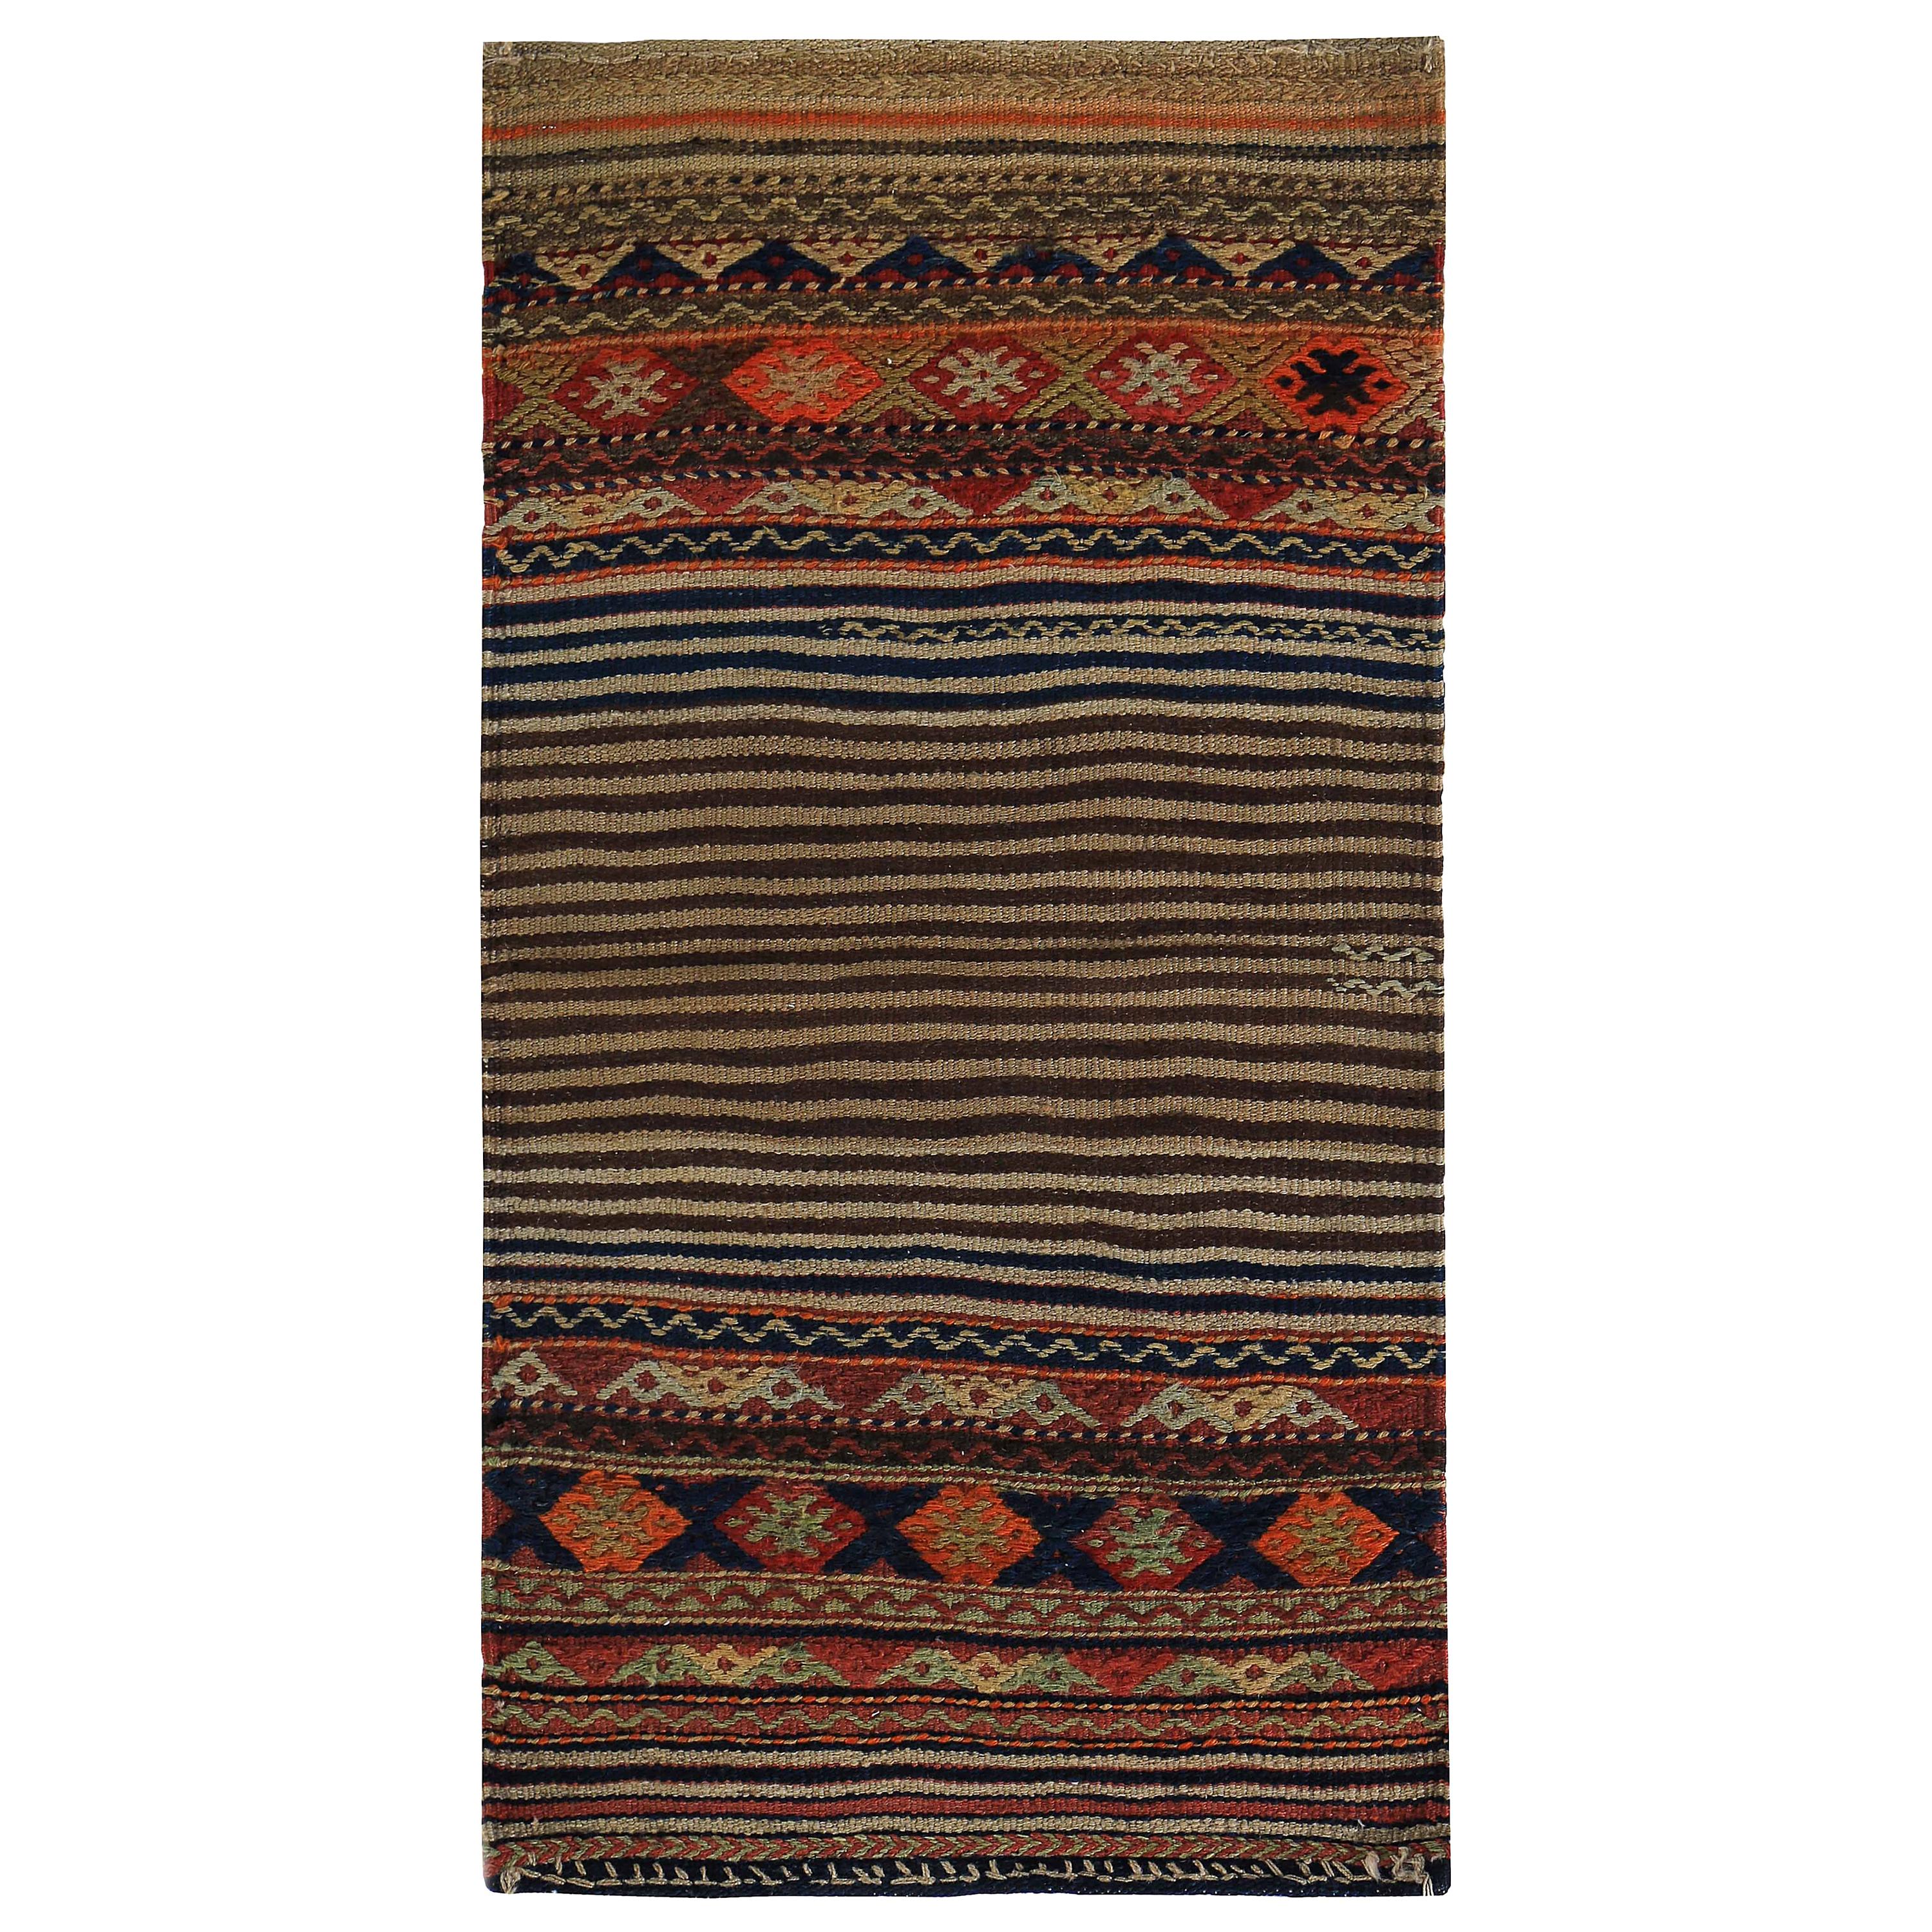 Modern Turkish Kilim Rug with Mixed Orange and Brown Tribal Details